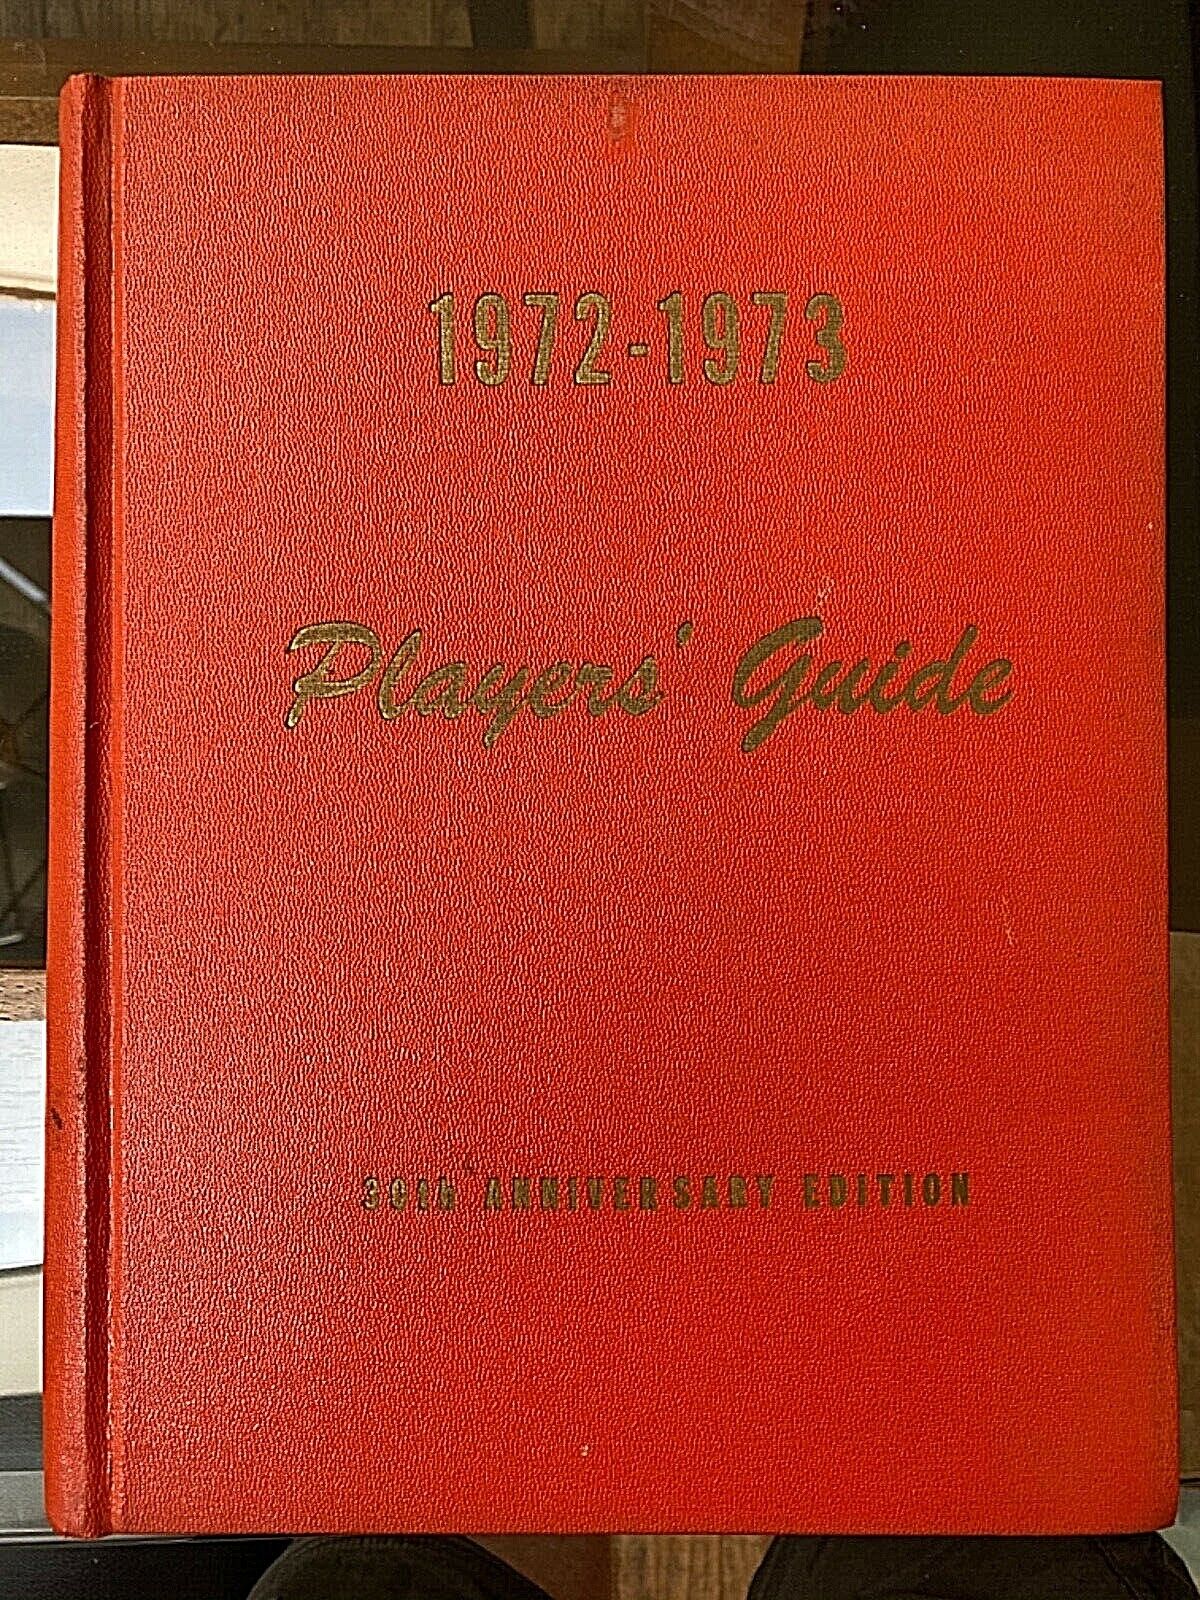 1972 Players Guide Guild SAG TV Stage Movie Actor Agency Casting Director Stars